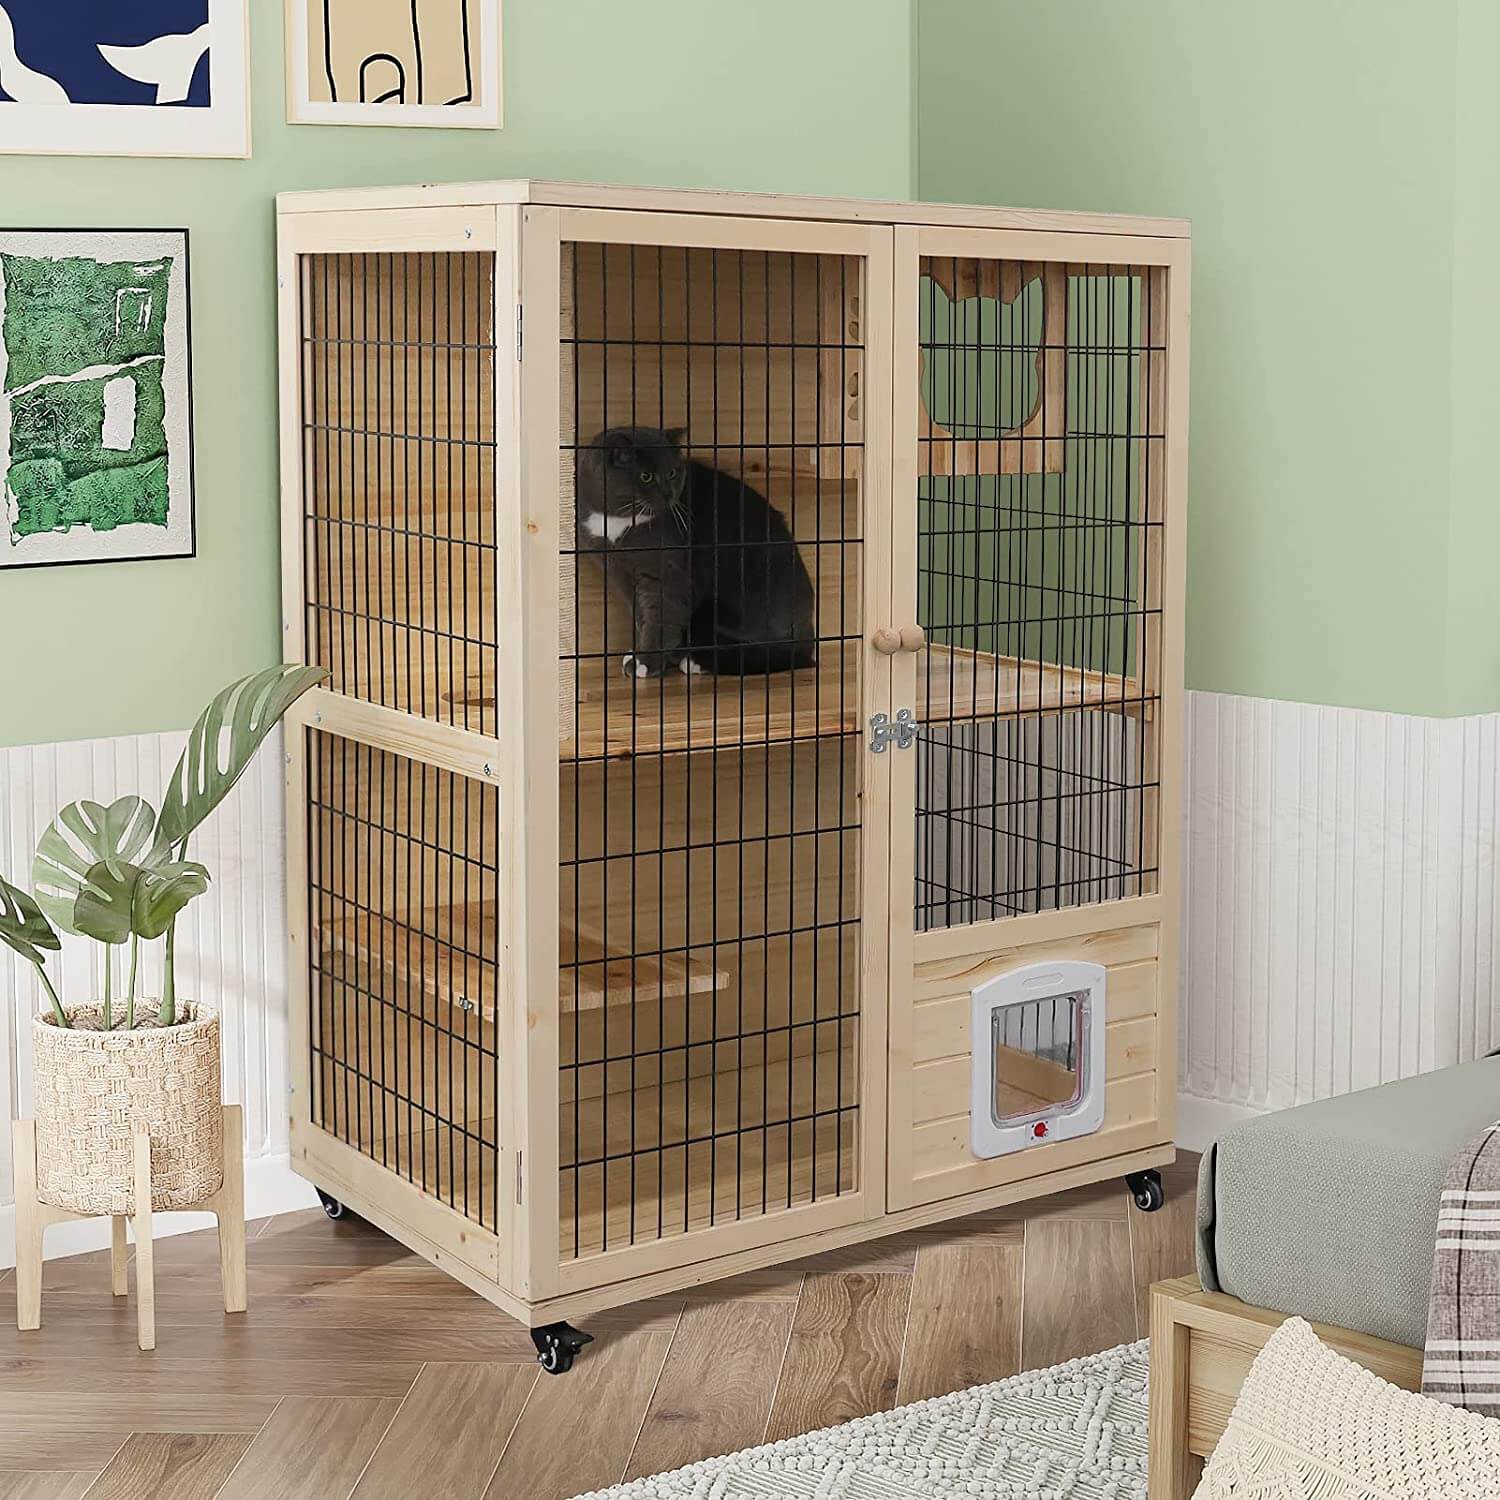 Cat sit in the Elecwish Wooden Large Cat House